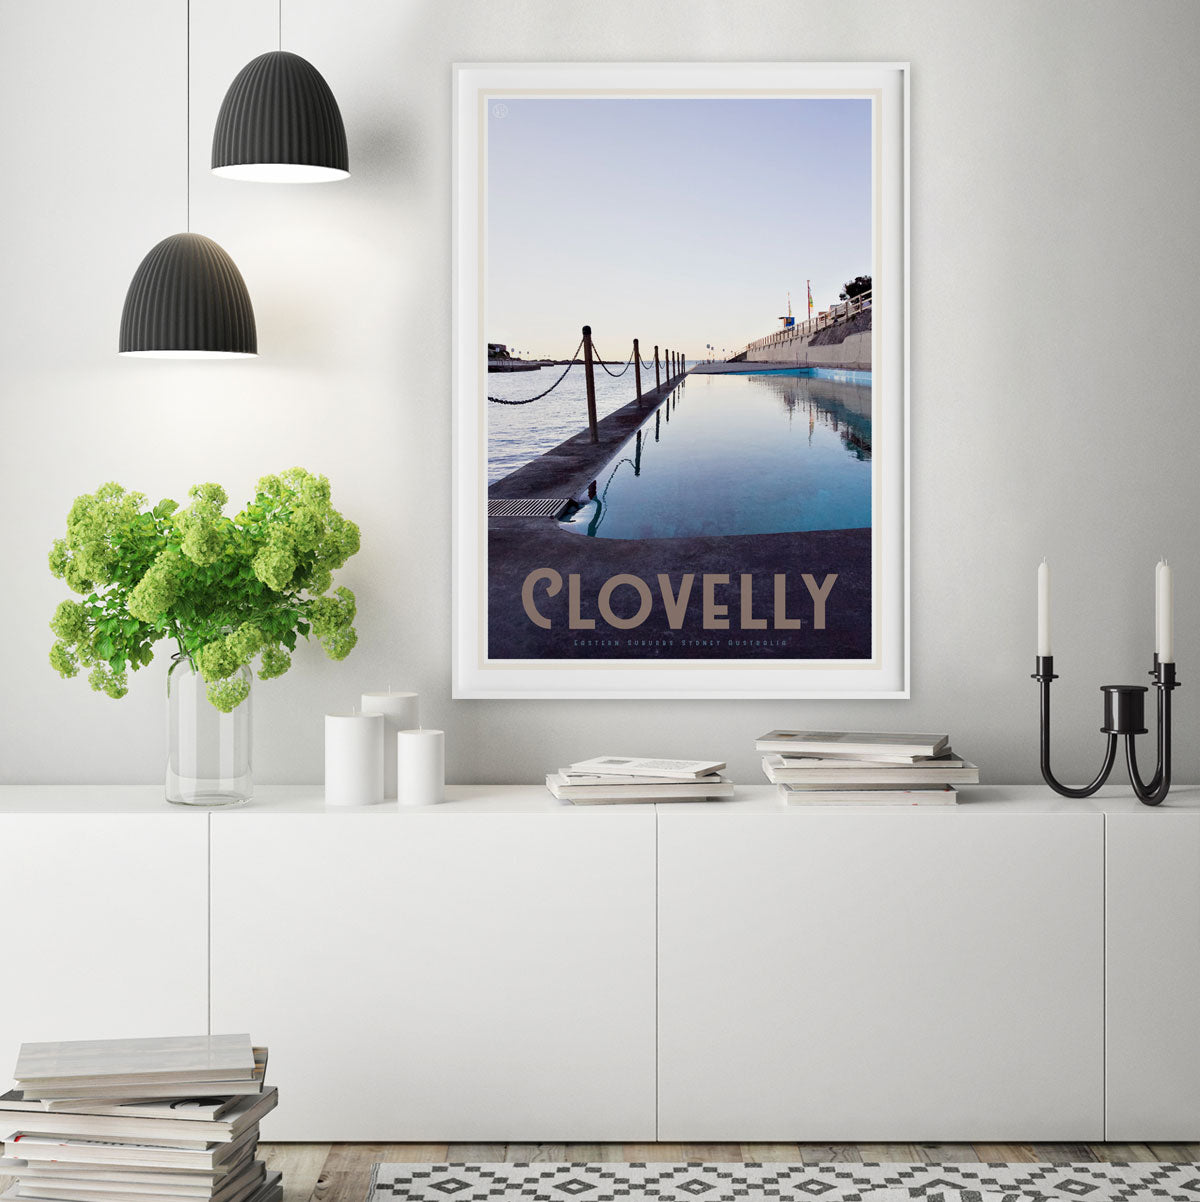 Clovelly vintage travel style framed print by places we luv